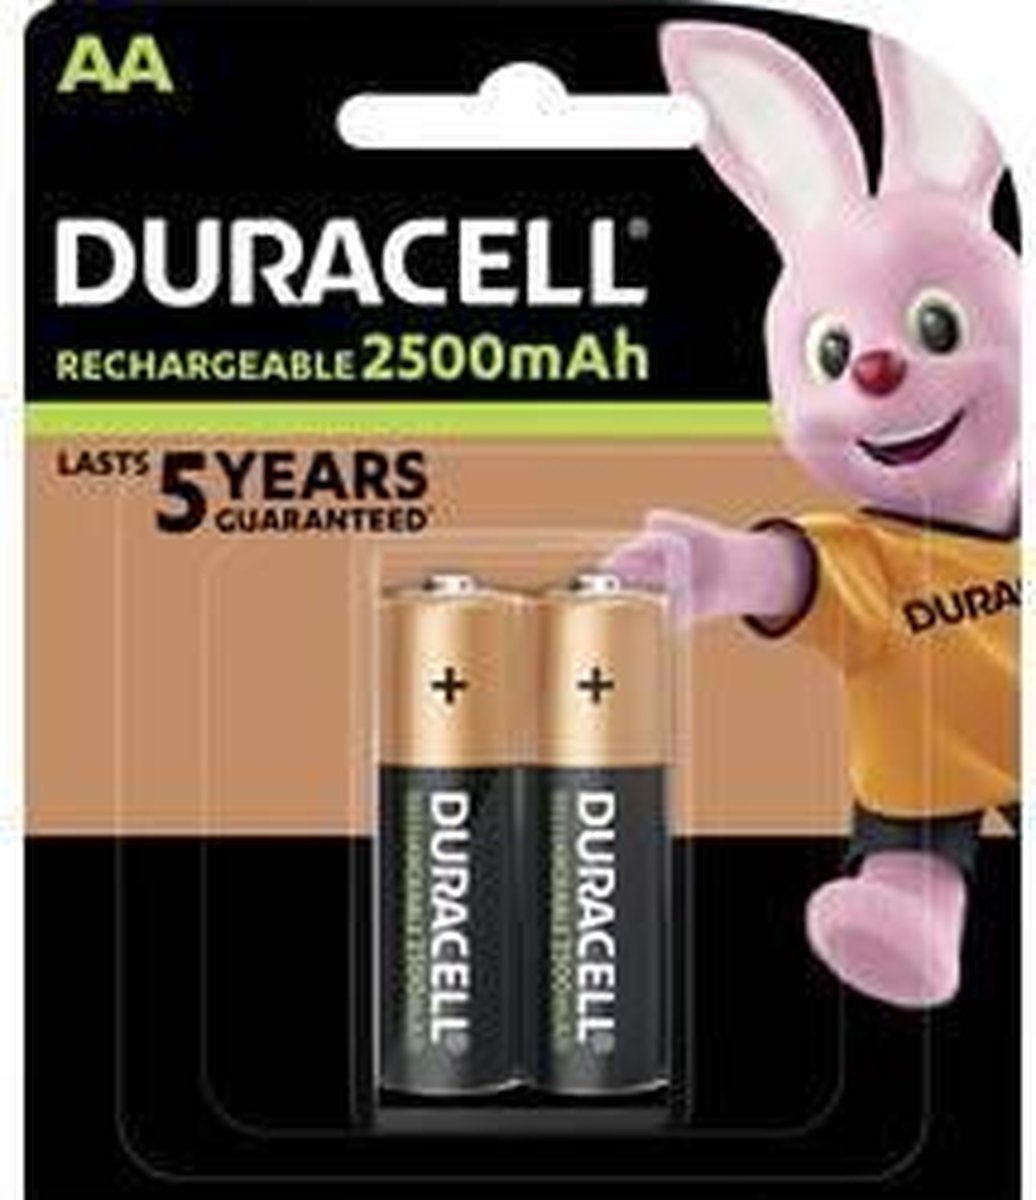 Duracell Rechargeable Stay Charged Aa/hr6 2500mah Blister 2